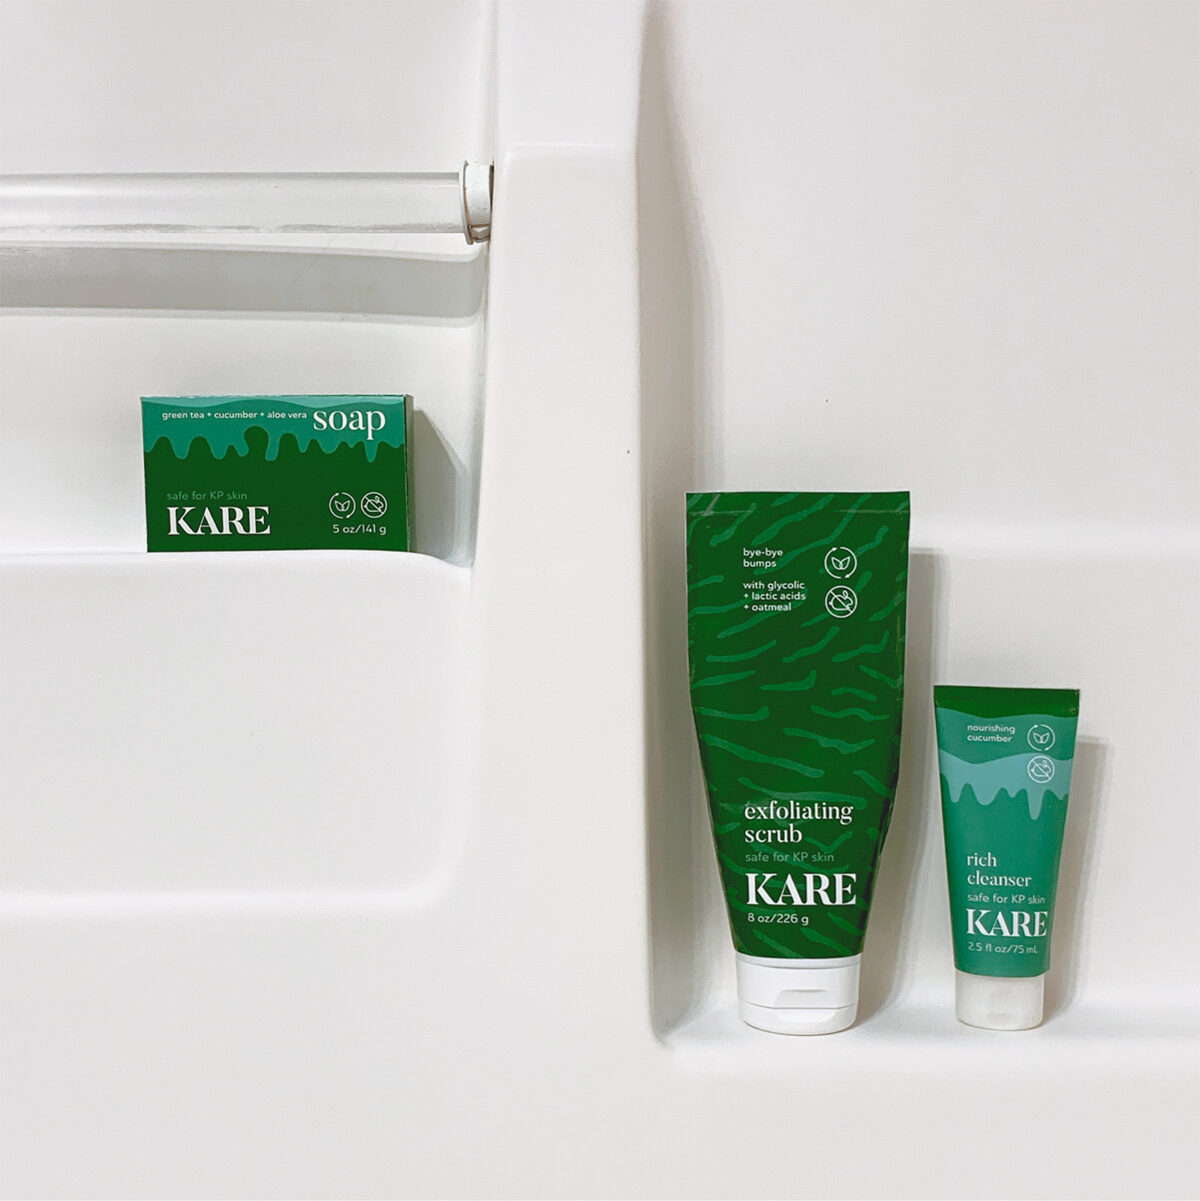 KARE restore + renew products